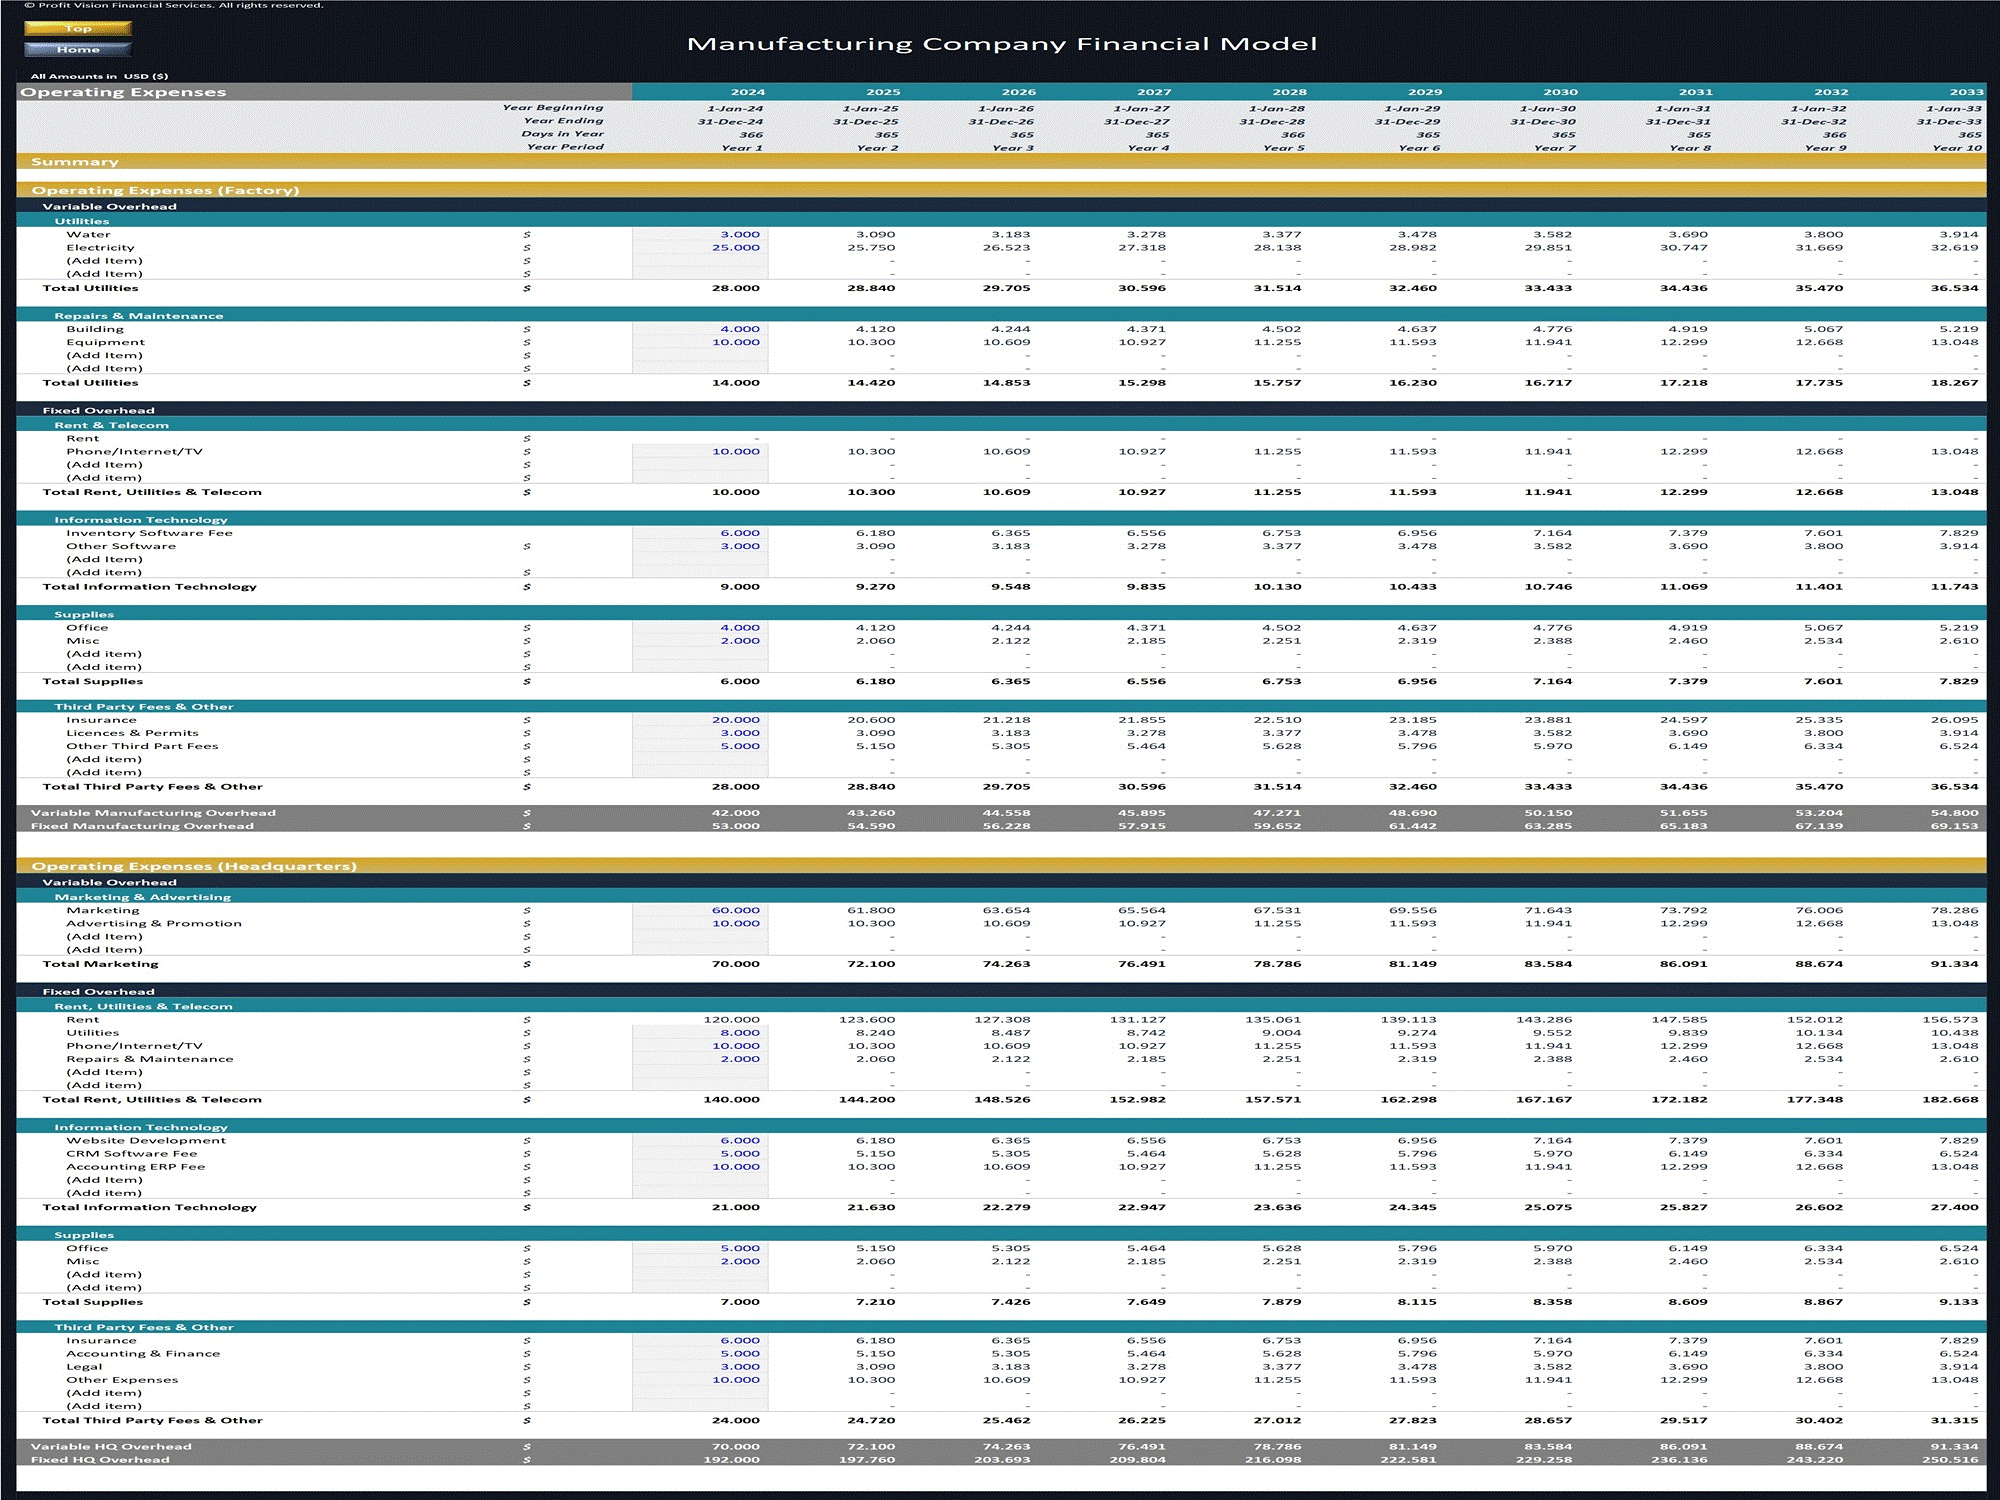 This is a partial preview of Manufacturing Company Financial Model - Dynamic 10 Year Forecast (Excel workbook (XLSX)). 